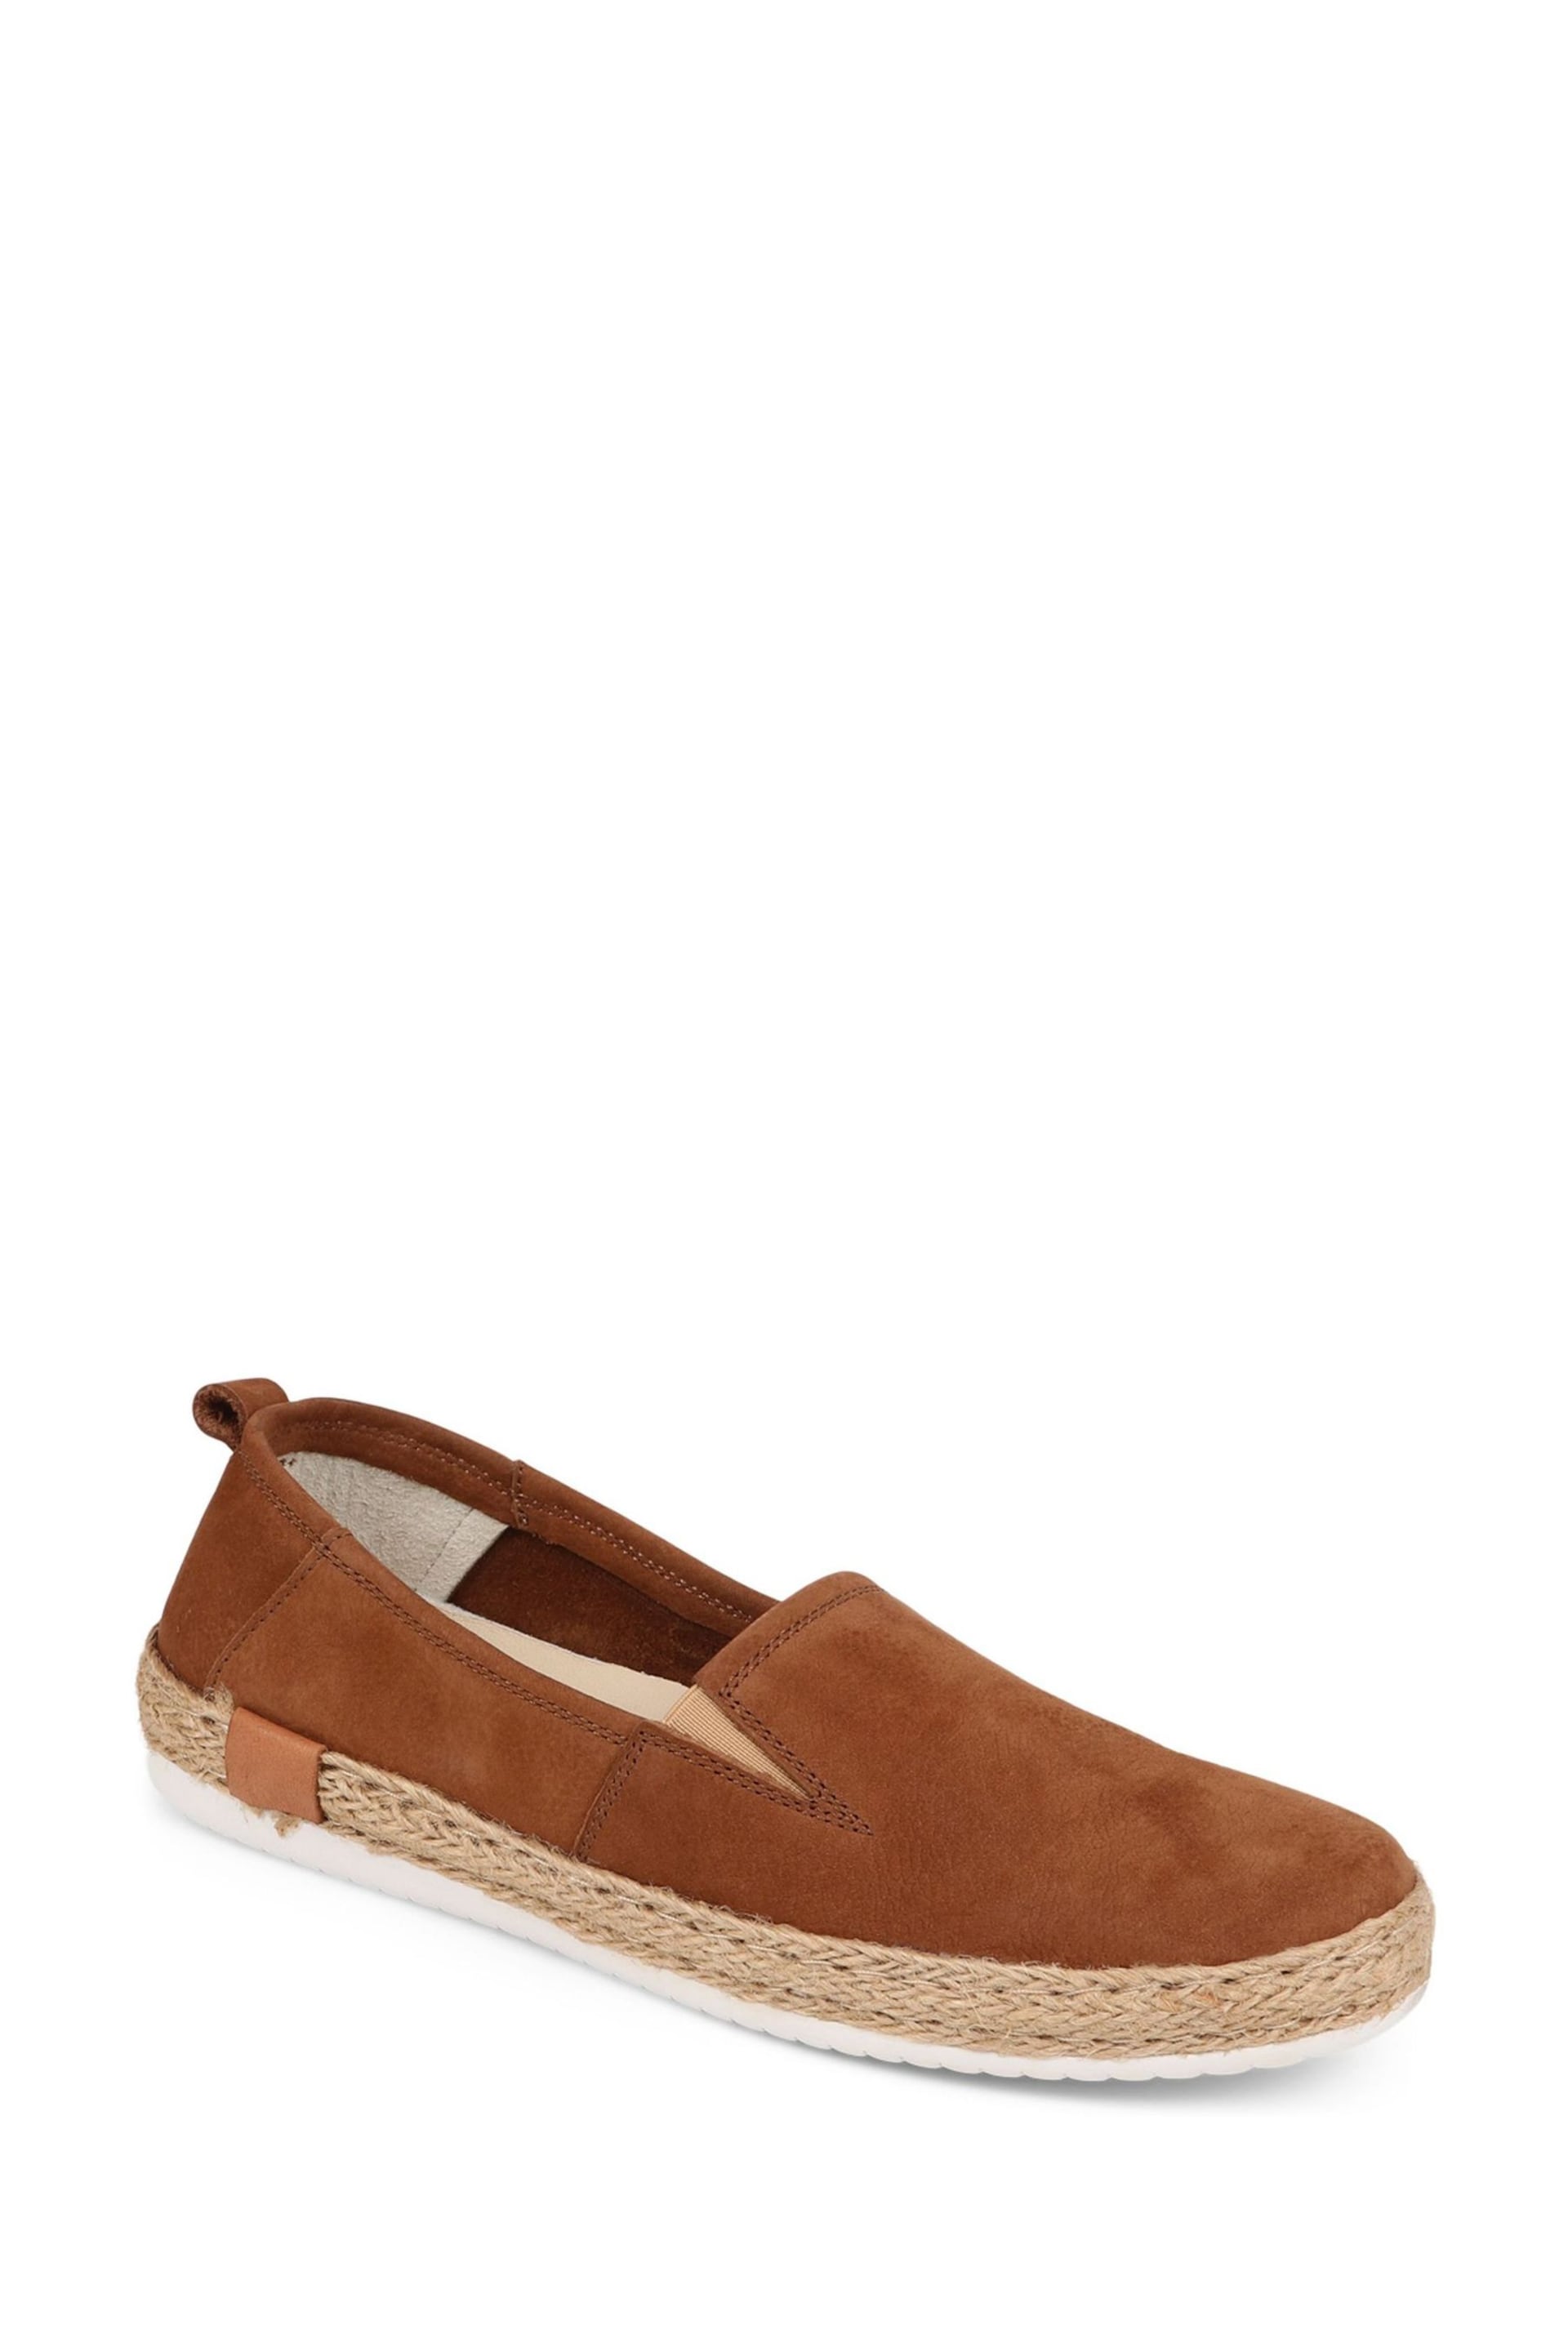 Pavers Natural Milan Leather Espadrille Flats - Image 1 of 5